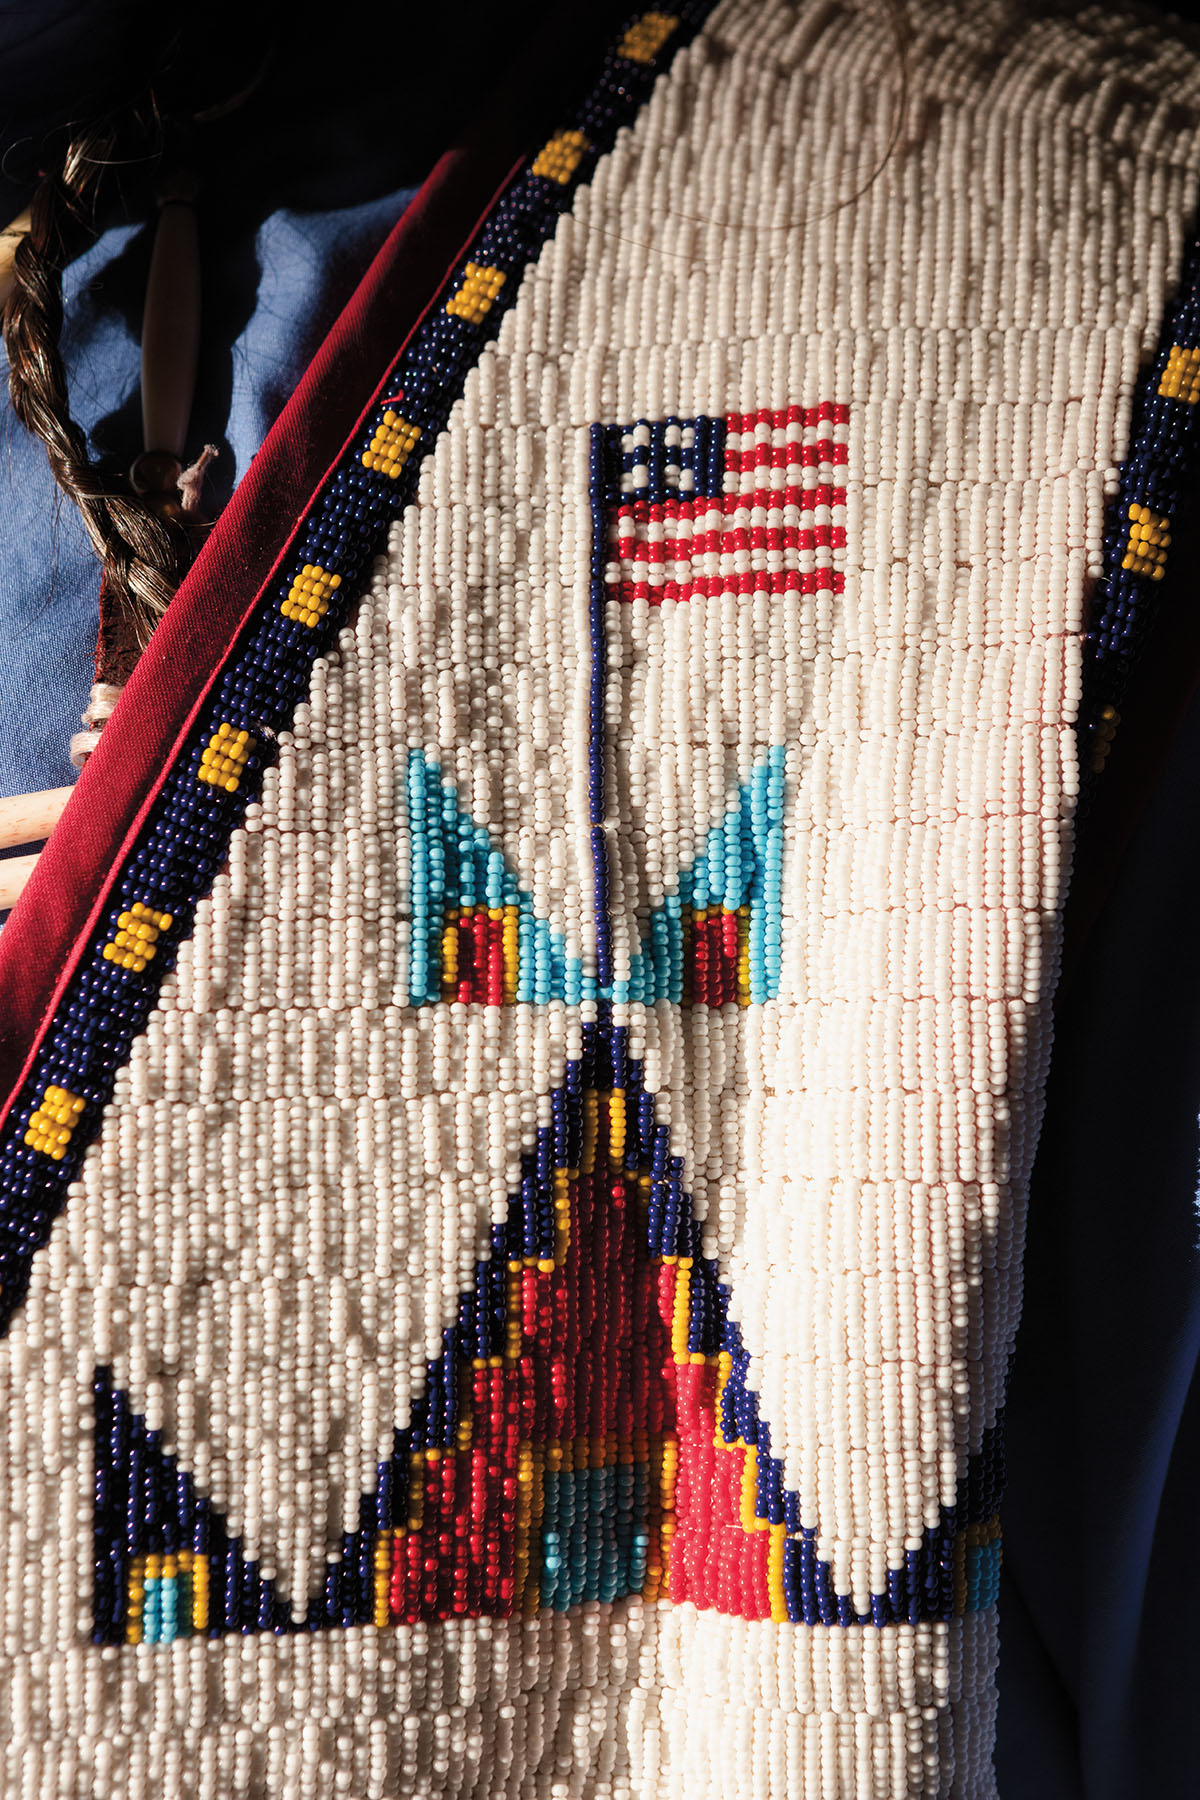 A closeup photograph of intricate beadwork, including a depiction of the American flag